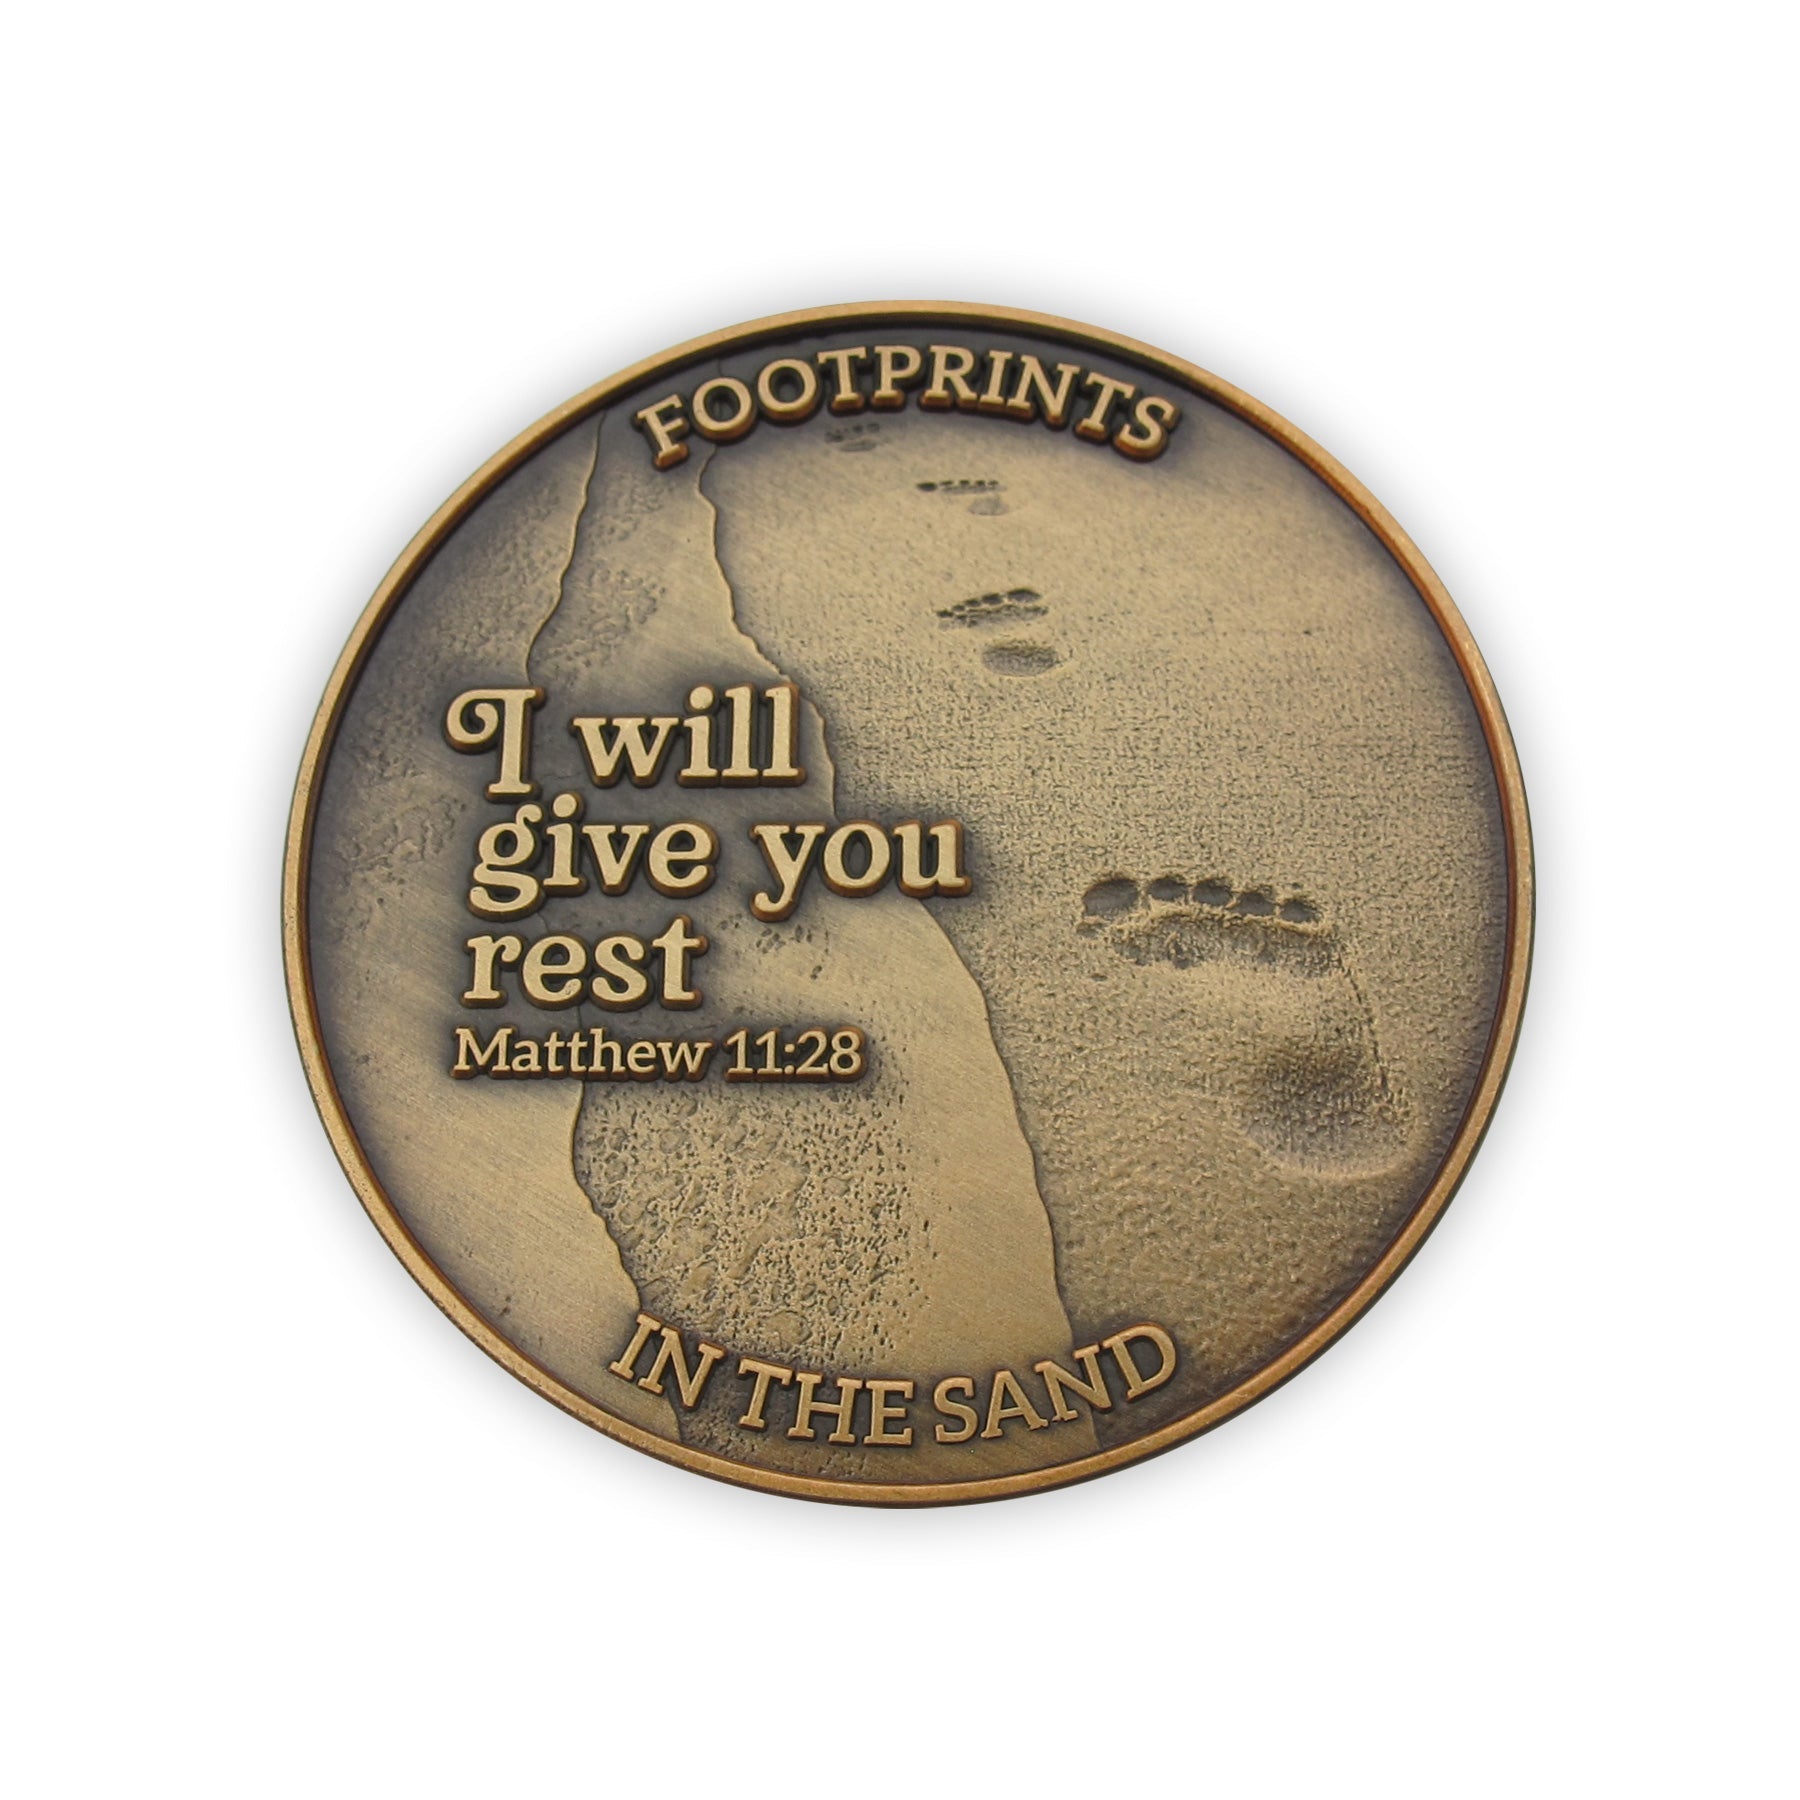 Front: Line of footprints, with text "Footprints in The Sand" / "I will give you rest. Matthew 11:28"